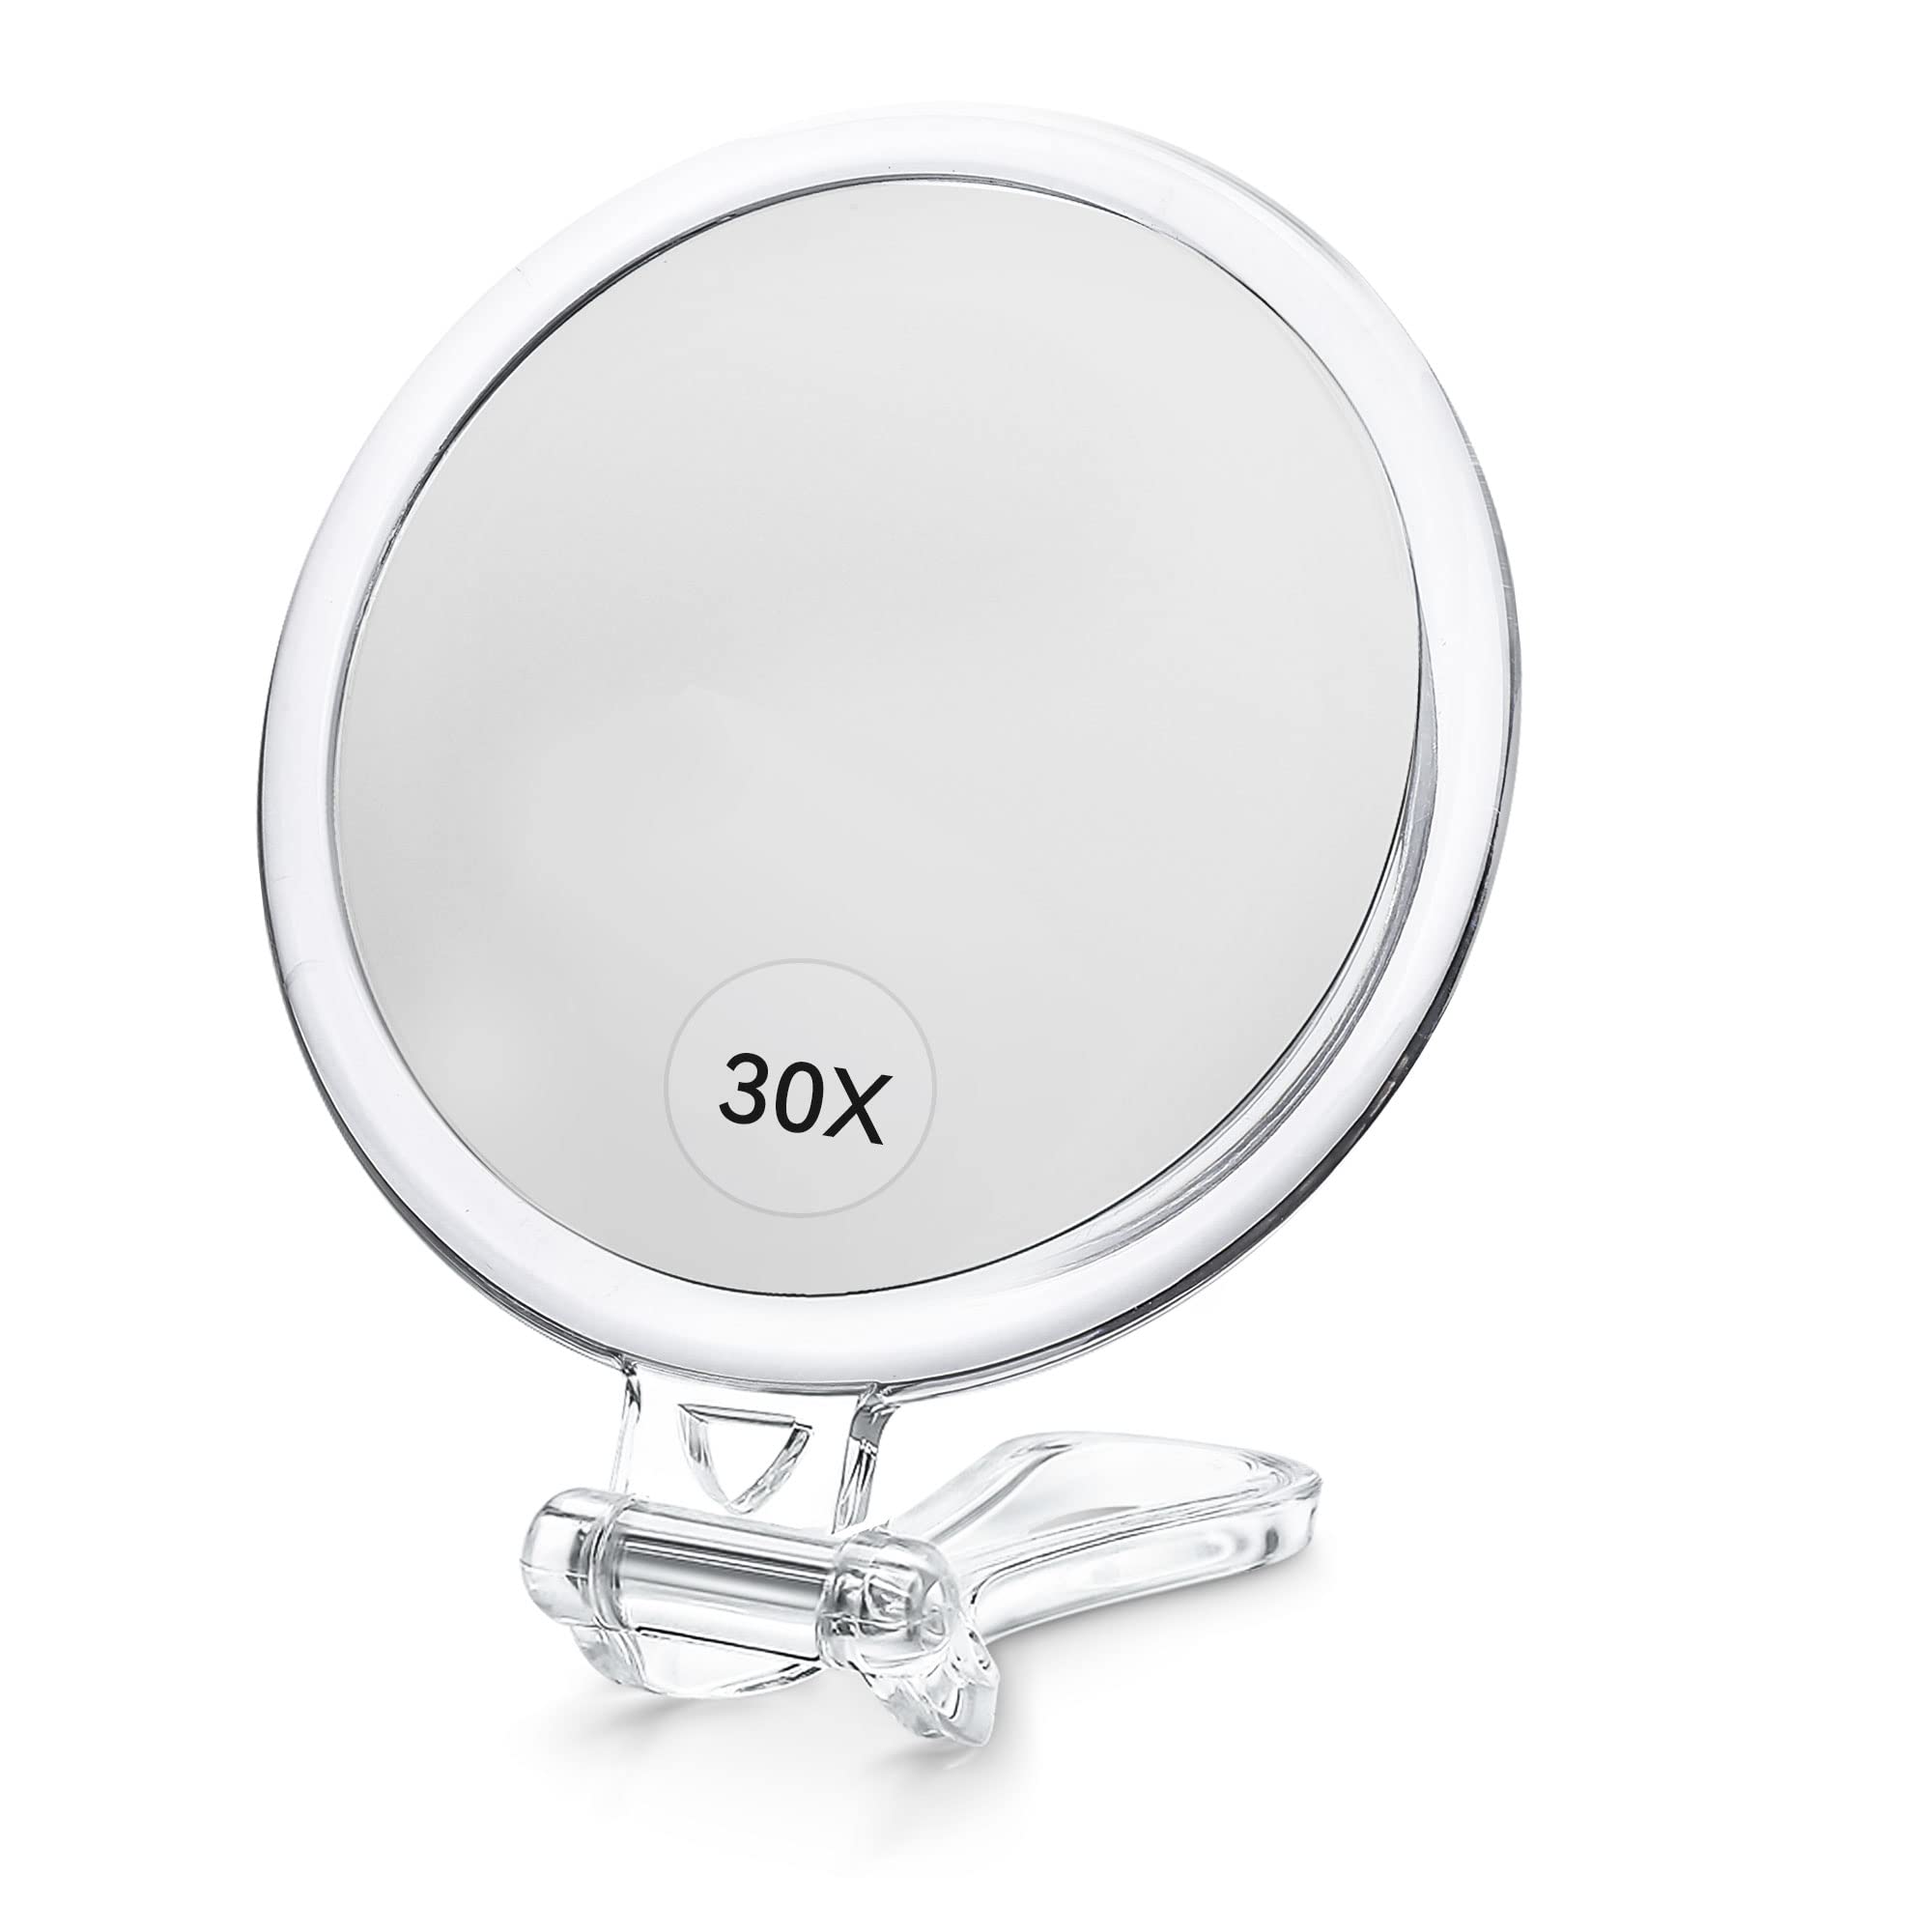 B Beauty Planet Magnifying Mirror, 30X Hand Mirror with Handle for Travel  Magnifying Mirror, Handheld Magnifying Mirror with Double Side 30X/1X  Magnification, 30X Hand Held Mirror for Eyes Makeup 5 IN